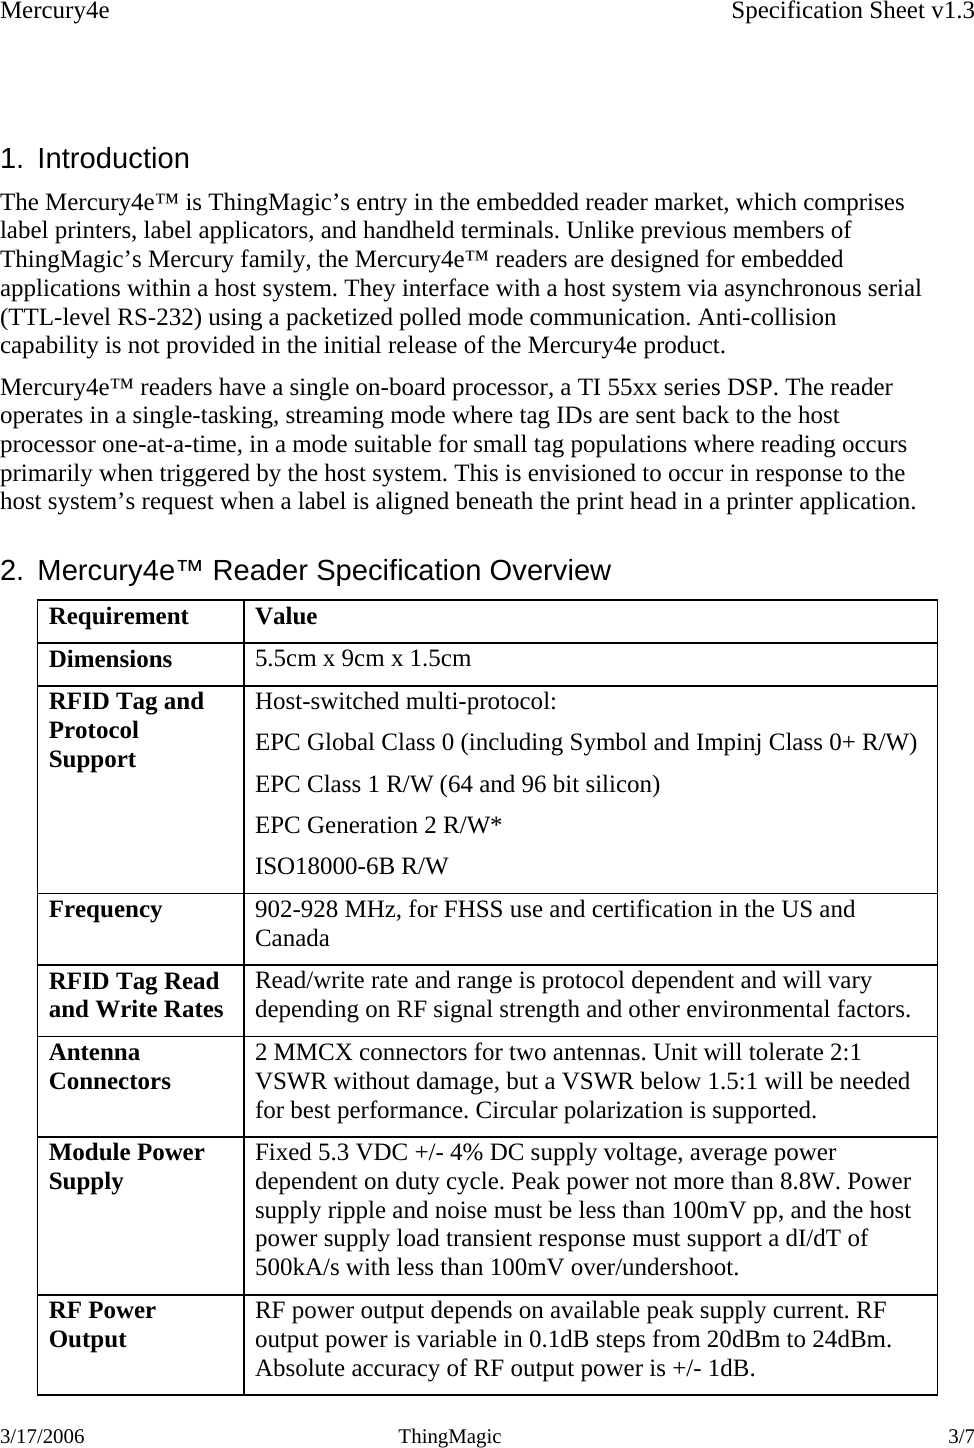 Mercury4e    Specification Sheet v1.3 3/17/2006 ThingMagic  3/7     1. Introduction The Mercury4e™ is ThingMagic’s entry in the embedded reader market, which comprises label printers, label applicators, and handheld terminals. Unlike previous members of ThingMagic’s Mercury family, the Mercury4e™ readers are designed for embedded applications within a host system. They interface with a host system via asynchronous serial (TTL-level RS-232) using a packetized polled mode communication. Anti-collision capability is not provided in the initial release of the Mercury4e product. Mercury4e™ readers have a single on-board processor, a TI 55xx series DSP. The reader operates in a single-tasking, streaming mode where tag IDs are sent back to the host processor one-at-a-time, in a mode suitable for small tag populations where reading occurs primarily when triggered by the host system. This is envisioned to occur in response to the host system’s request when a label is aligned beneath the print head in a printer application. 2.  Mercury4e™ Reader Specification Overview Requirement Value Dimensions  5.5cm x 9cm x 1.5cm  RFID Tag and Protocol Support Host-switched multi-protocol: EPC Global Class 0 (including Symbol and Impinj Class 0+ R/W) EPC Class 1 R/W (64 and 96 bit silicon)  EPC Generation 2 R/W* ISO18000-6B R/W Frequency  902-928 MHz, for FHSS use and certification in the US and Canada RFID Tag Read and Write Rates  Read/write rate and range is protocol dependent and will vary depending on RF signal strength and other environmental factors. Antenna Connectors   2 MMCX connectors for two antennas. Unit will tolerate 2:1 VSWR without damage, but a VSWR below 1.5:1 will be needed for best performance. Circular polarization is supported. Module Power Supply  Fixed 5.3 VDC +/- 4% DC supply voltage, average power dependent on duty cycle. Peak power not more than 8.8W. Power supply ripple and noise must be less than 100mV pp, and the host power supply load transient response must support a dI/dT of 500kA/s with less than 100mV over/undershoot. RF Power Output  RF power output depends on available peak supply current. RF output power is variable in 0.1dB steps from 20dBm to 24dBm. Absolute accuracy of RF output power is +/- 1dB. 